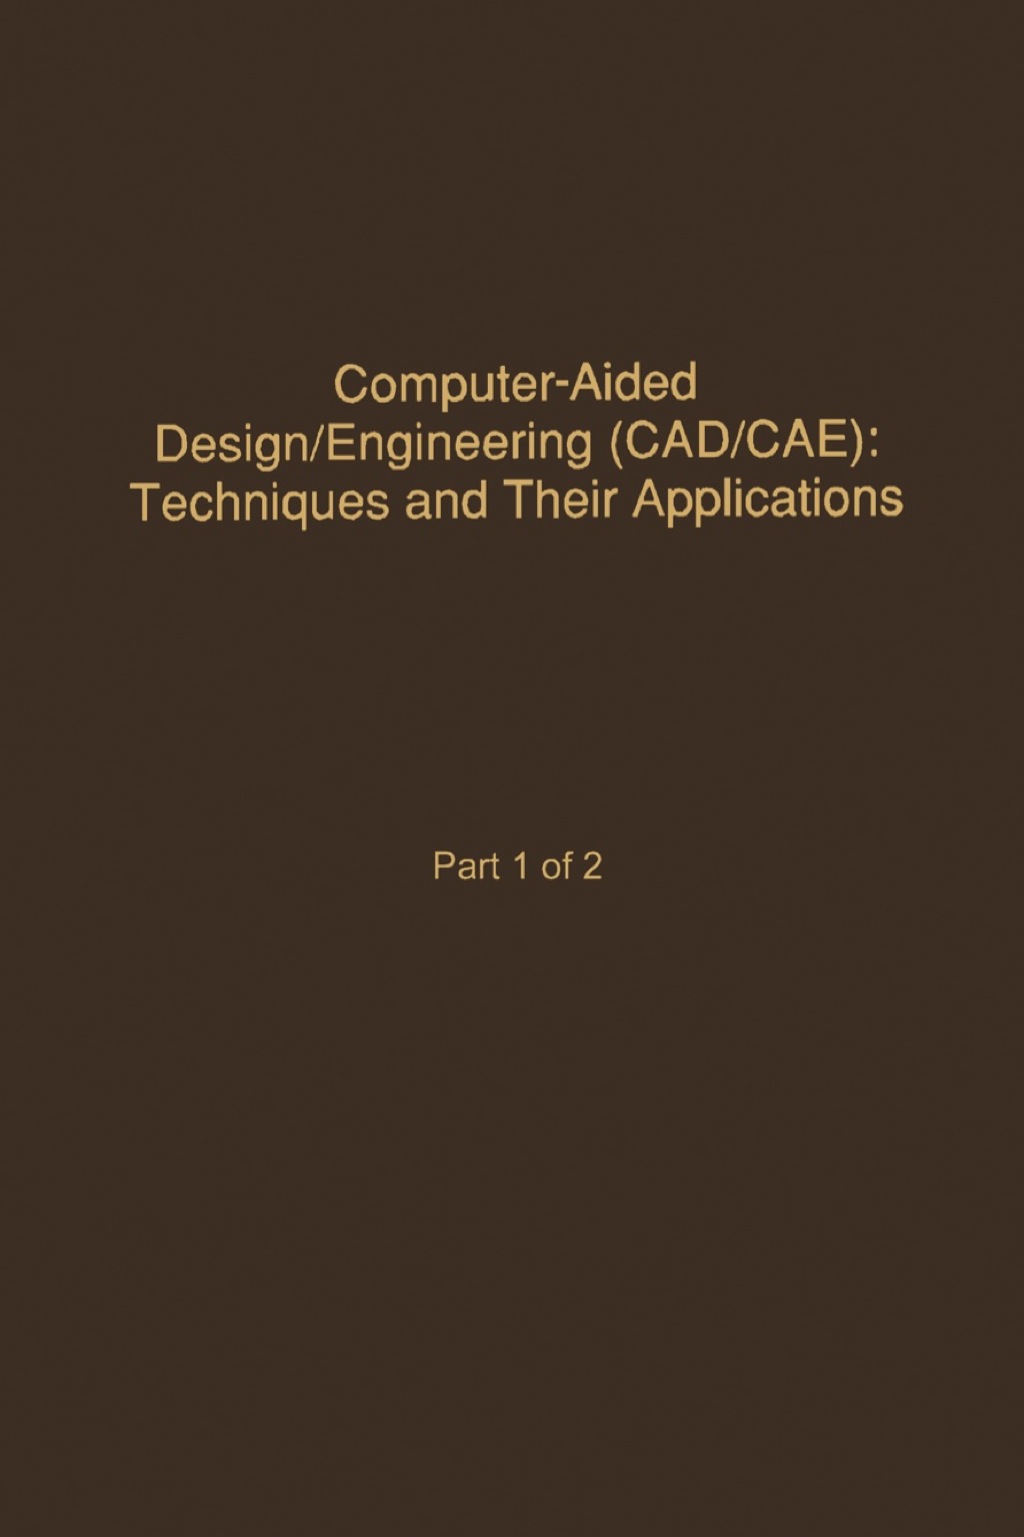 Control and Dynamic Systems V58: Computer-Aided Design/Engineering (Cad/Cae) Techniques And Their Applications Part 1 of  (eBook) - Leonides;  C.T.,